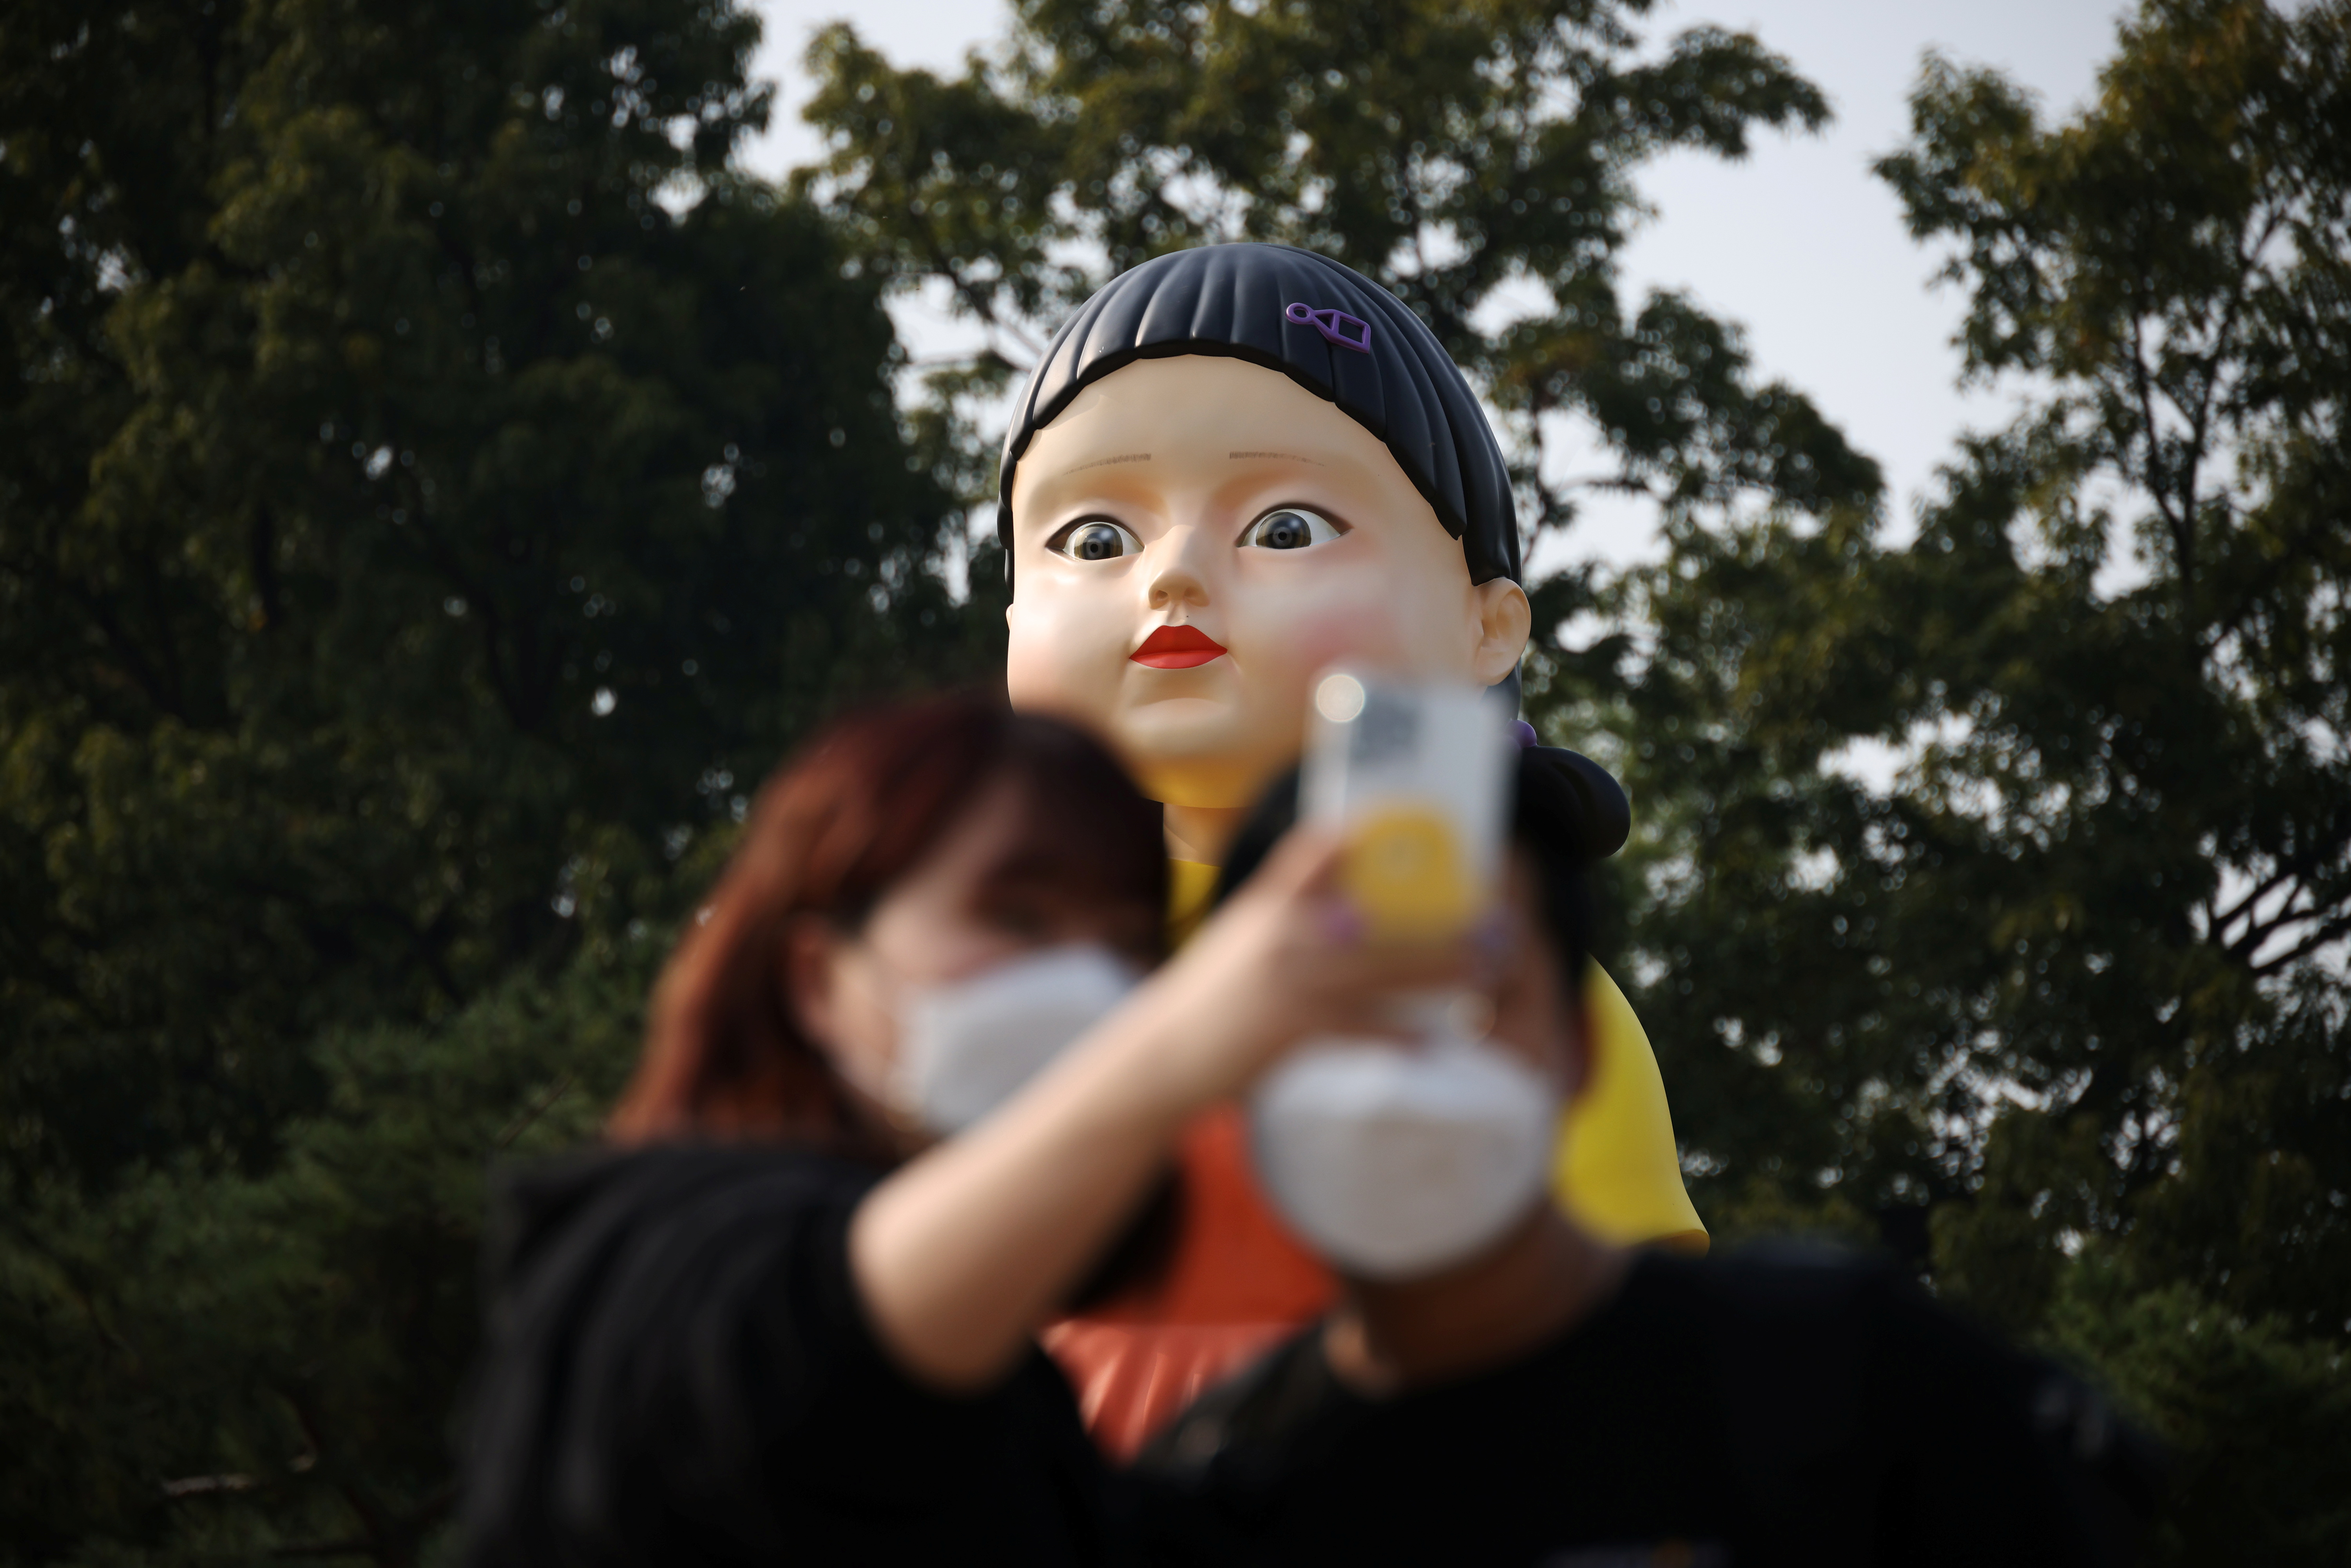 A couple takes a selfie with a giant doll named 'Younghee' from Netflix series 'Squid Game' on display at a park in Seoul